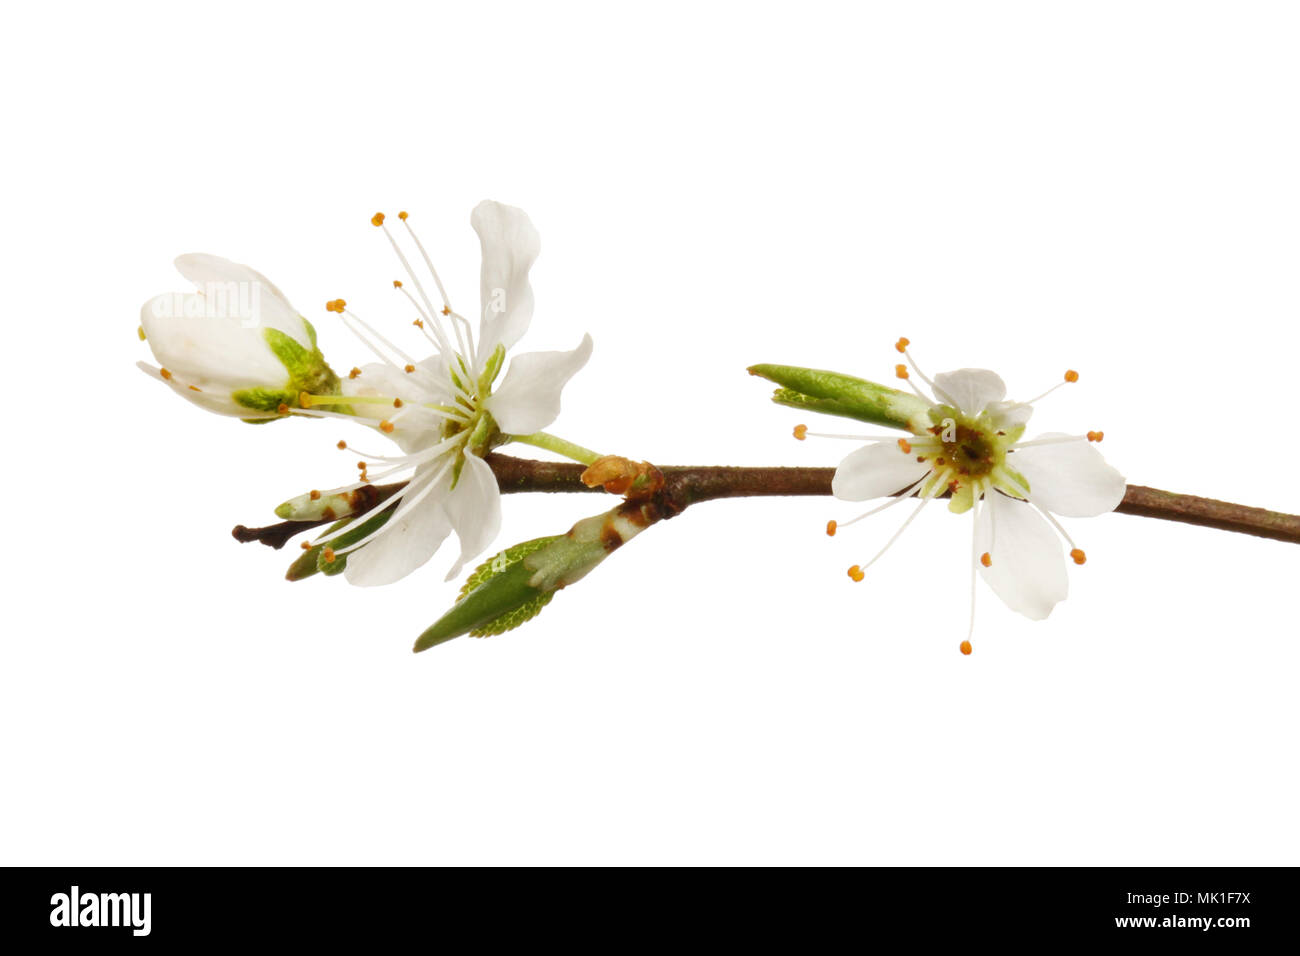 Blackthorn flowers and fresh leaf shoots isolated against white Stock Photo